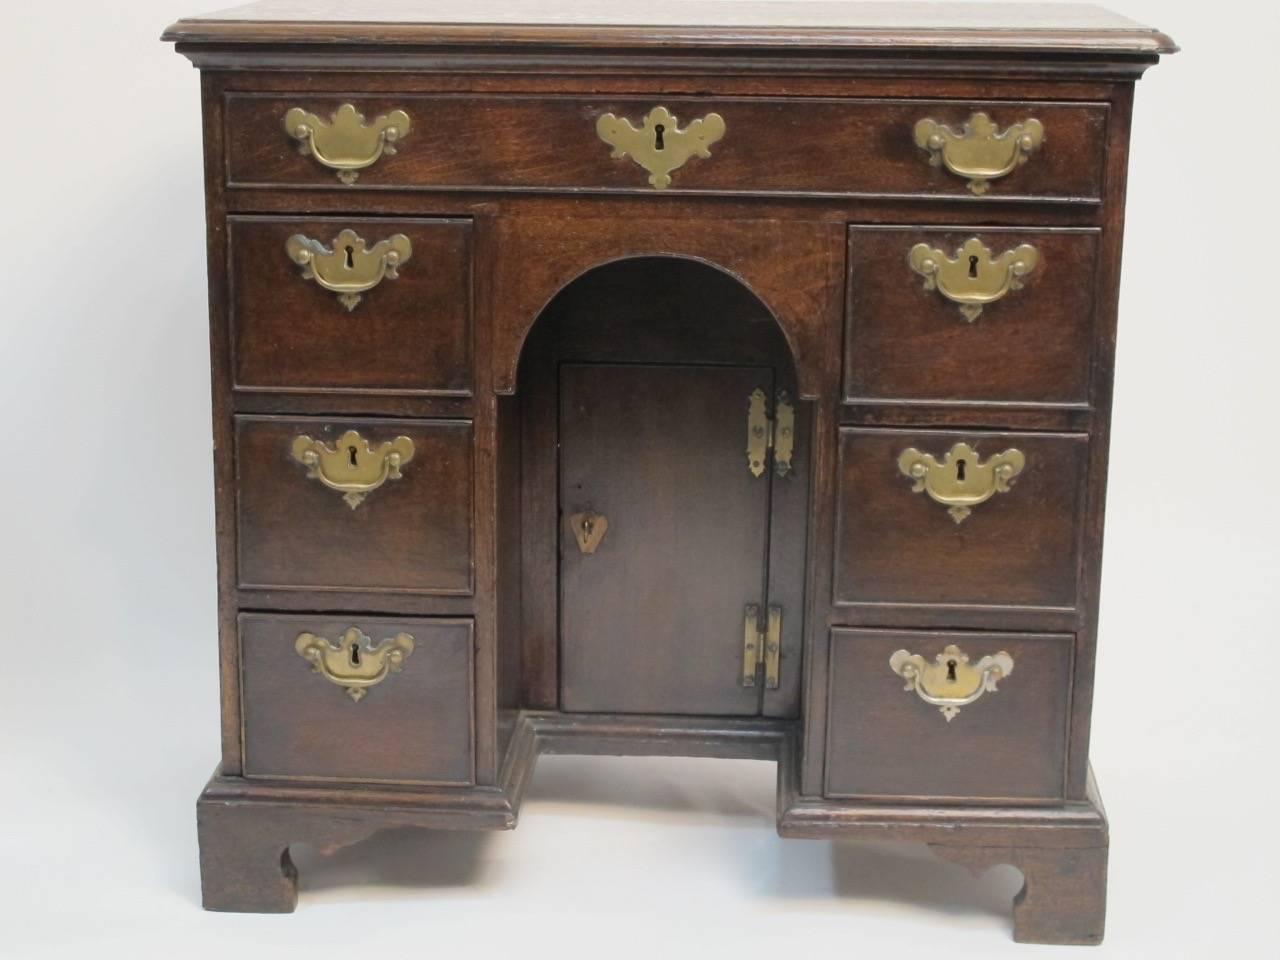 George II oak desk or dressing table with a single drawer above three short drawers flanking an arched center kneehole with cabinet door, brass hardware, England, early 18th century.